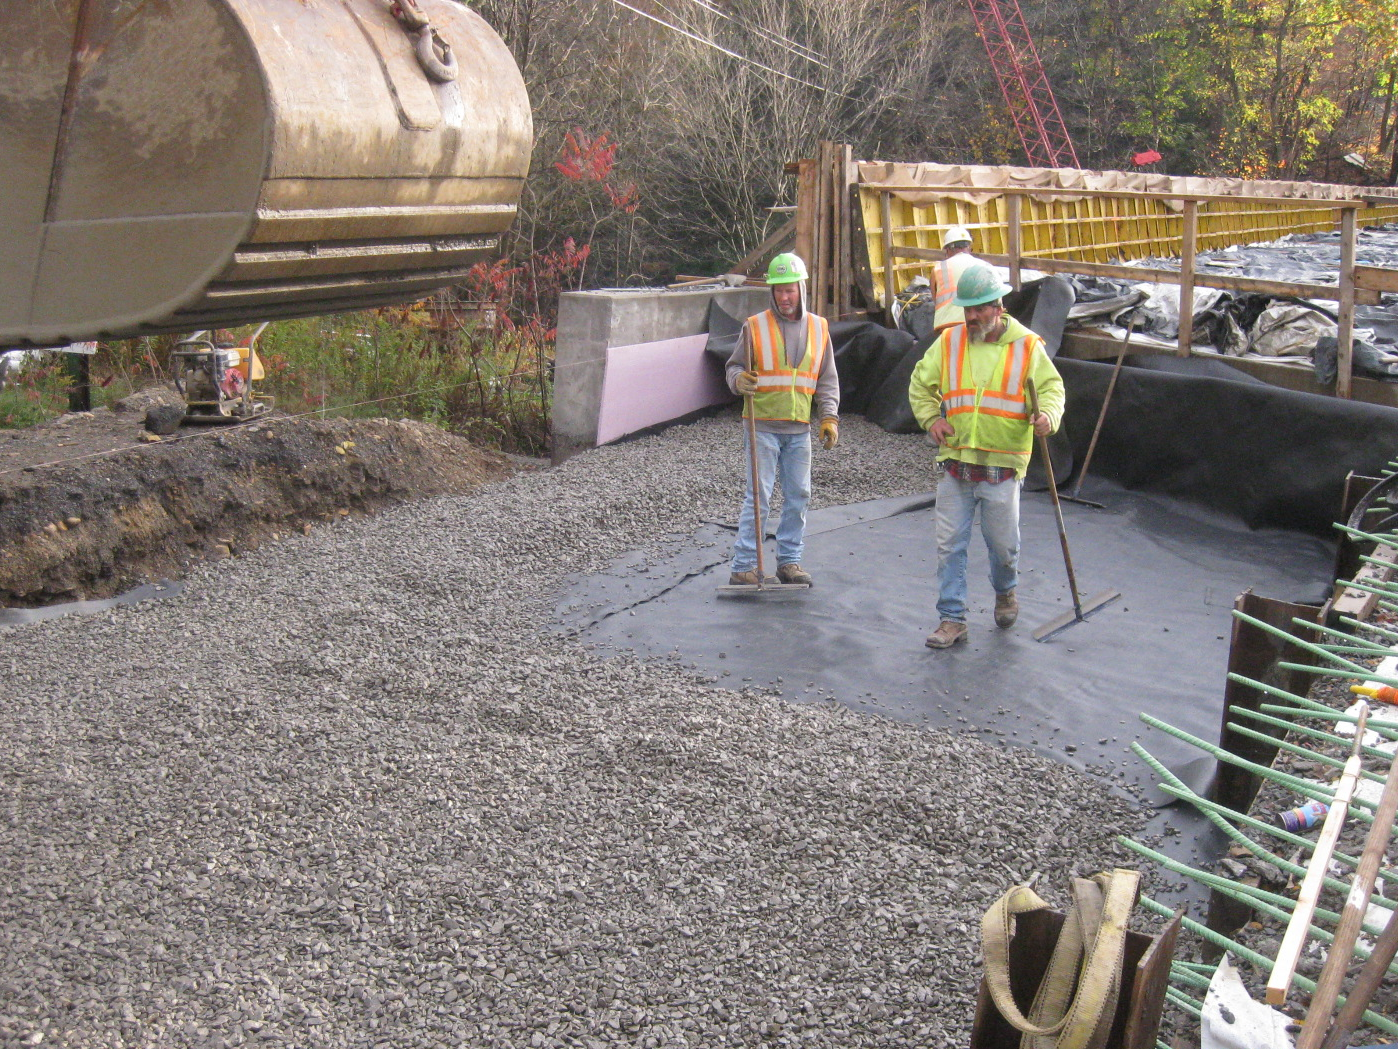 Construction workers spreading gravel over a tarp dumped by an excavator.